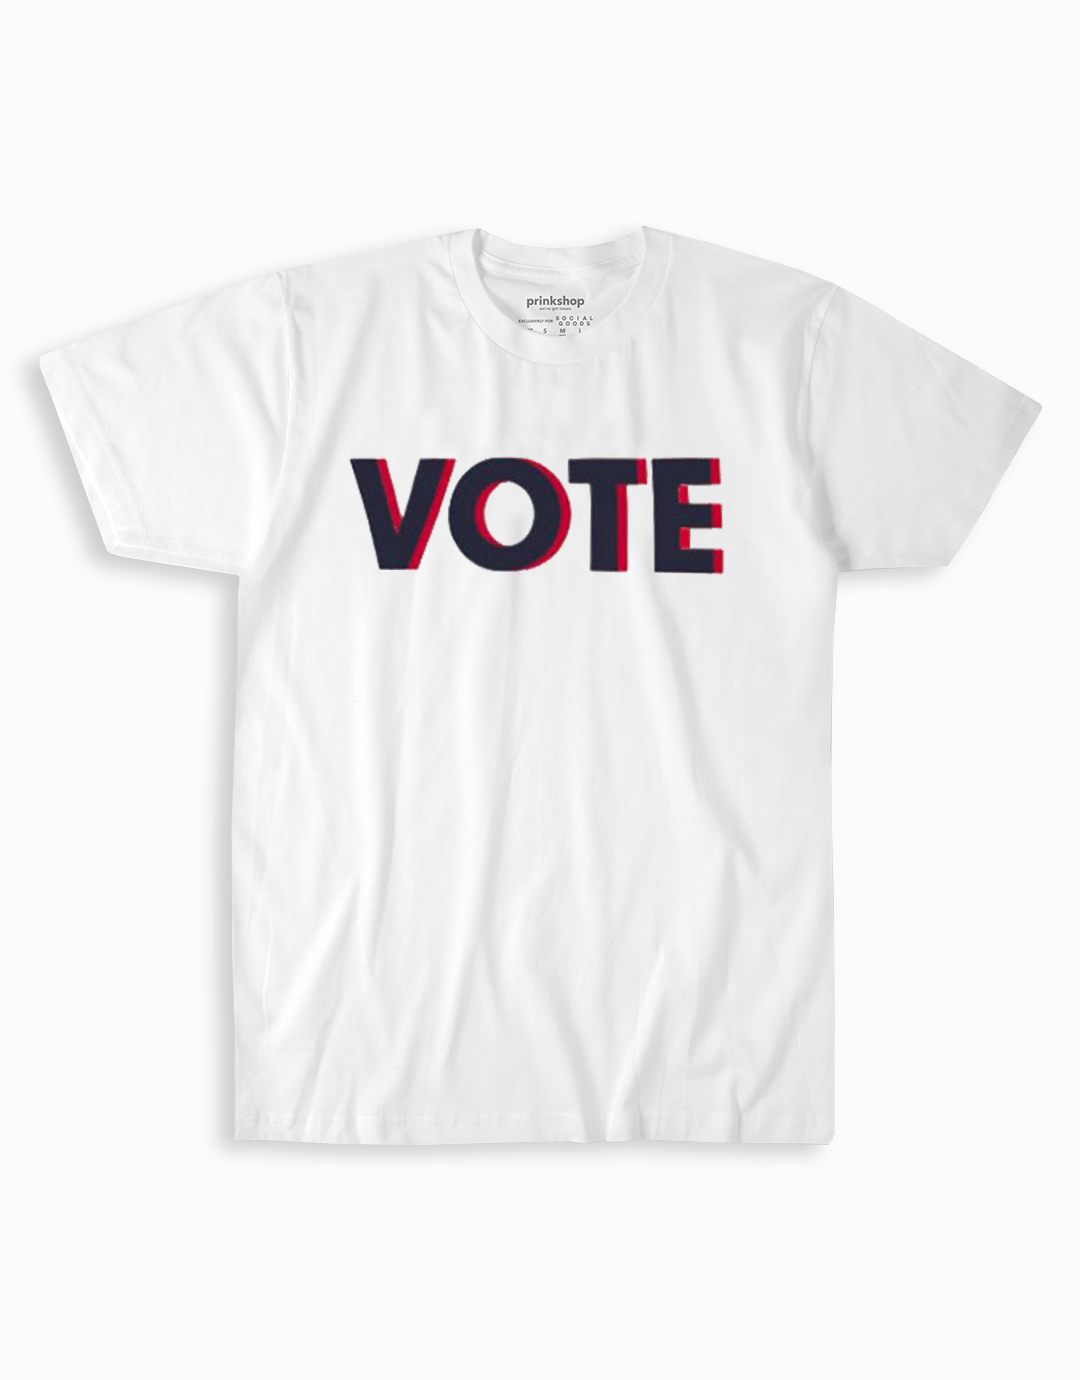 The VOTE T-shirt